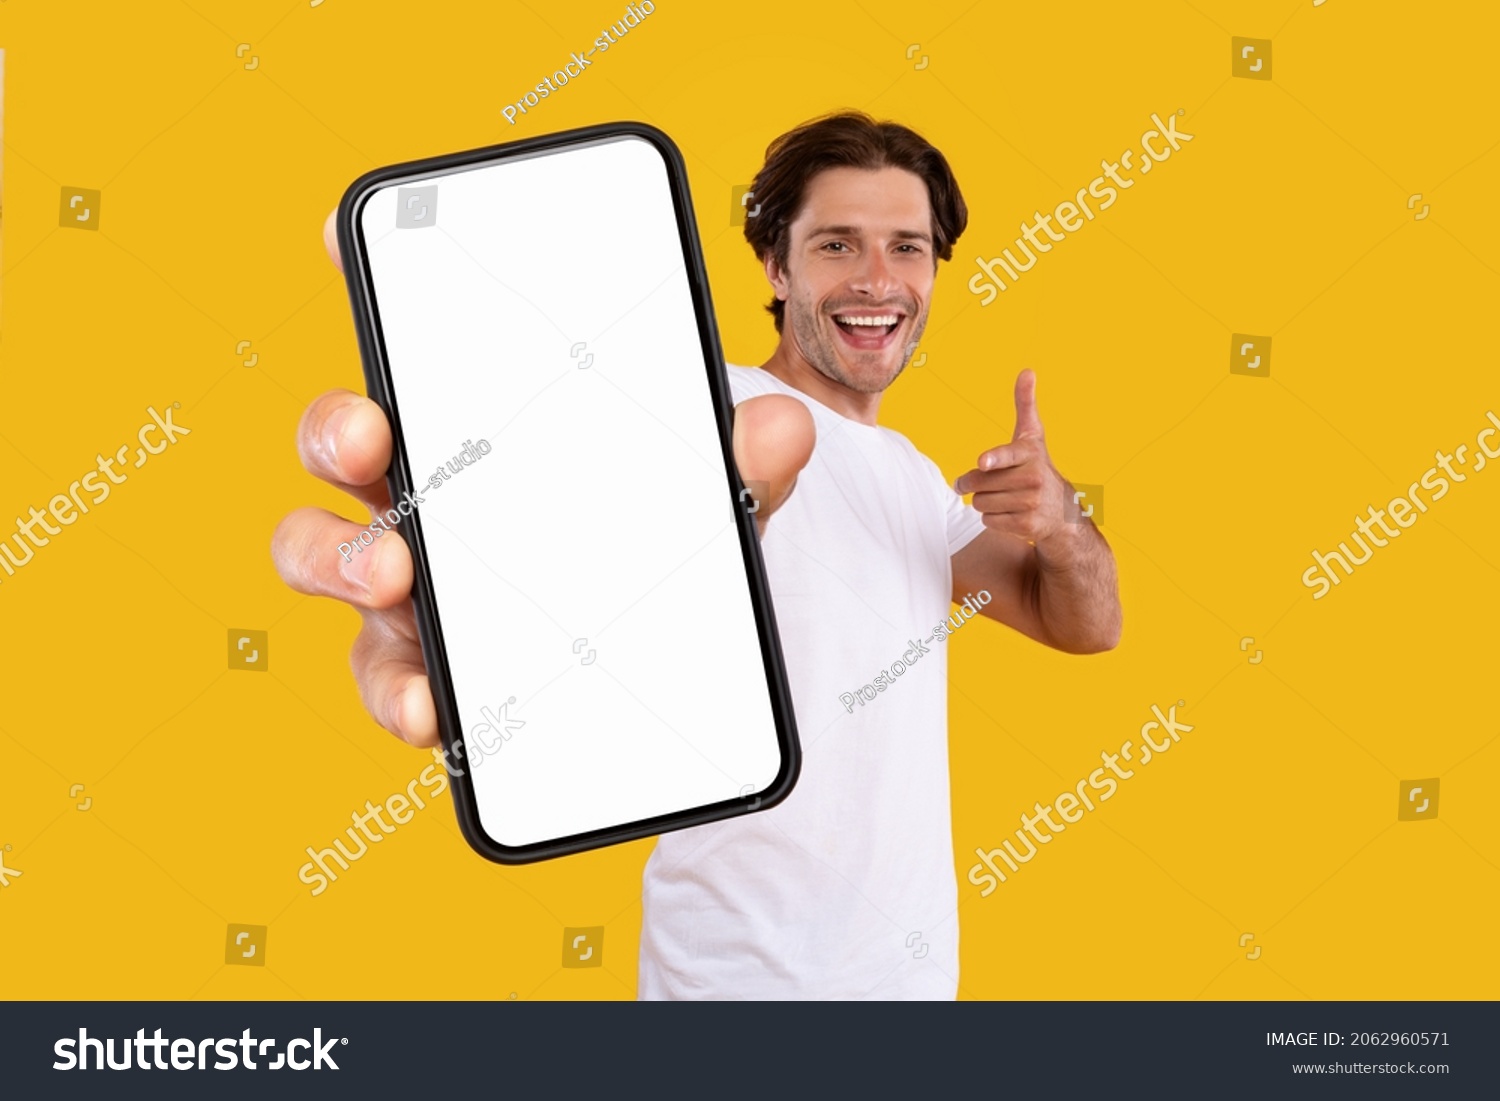 Mobile App Advertisement. Handsome Excited Man Showing Pointing At White Empty Smartphone Screen Posing Over Orange Studio Background, Smiling To Camera. Check This Out, Cellphone Display Mock Up #2062960571